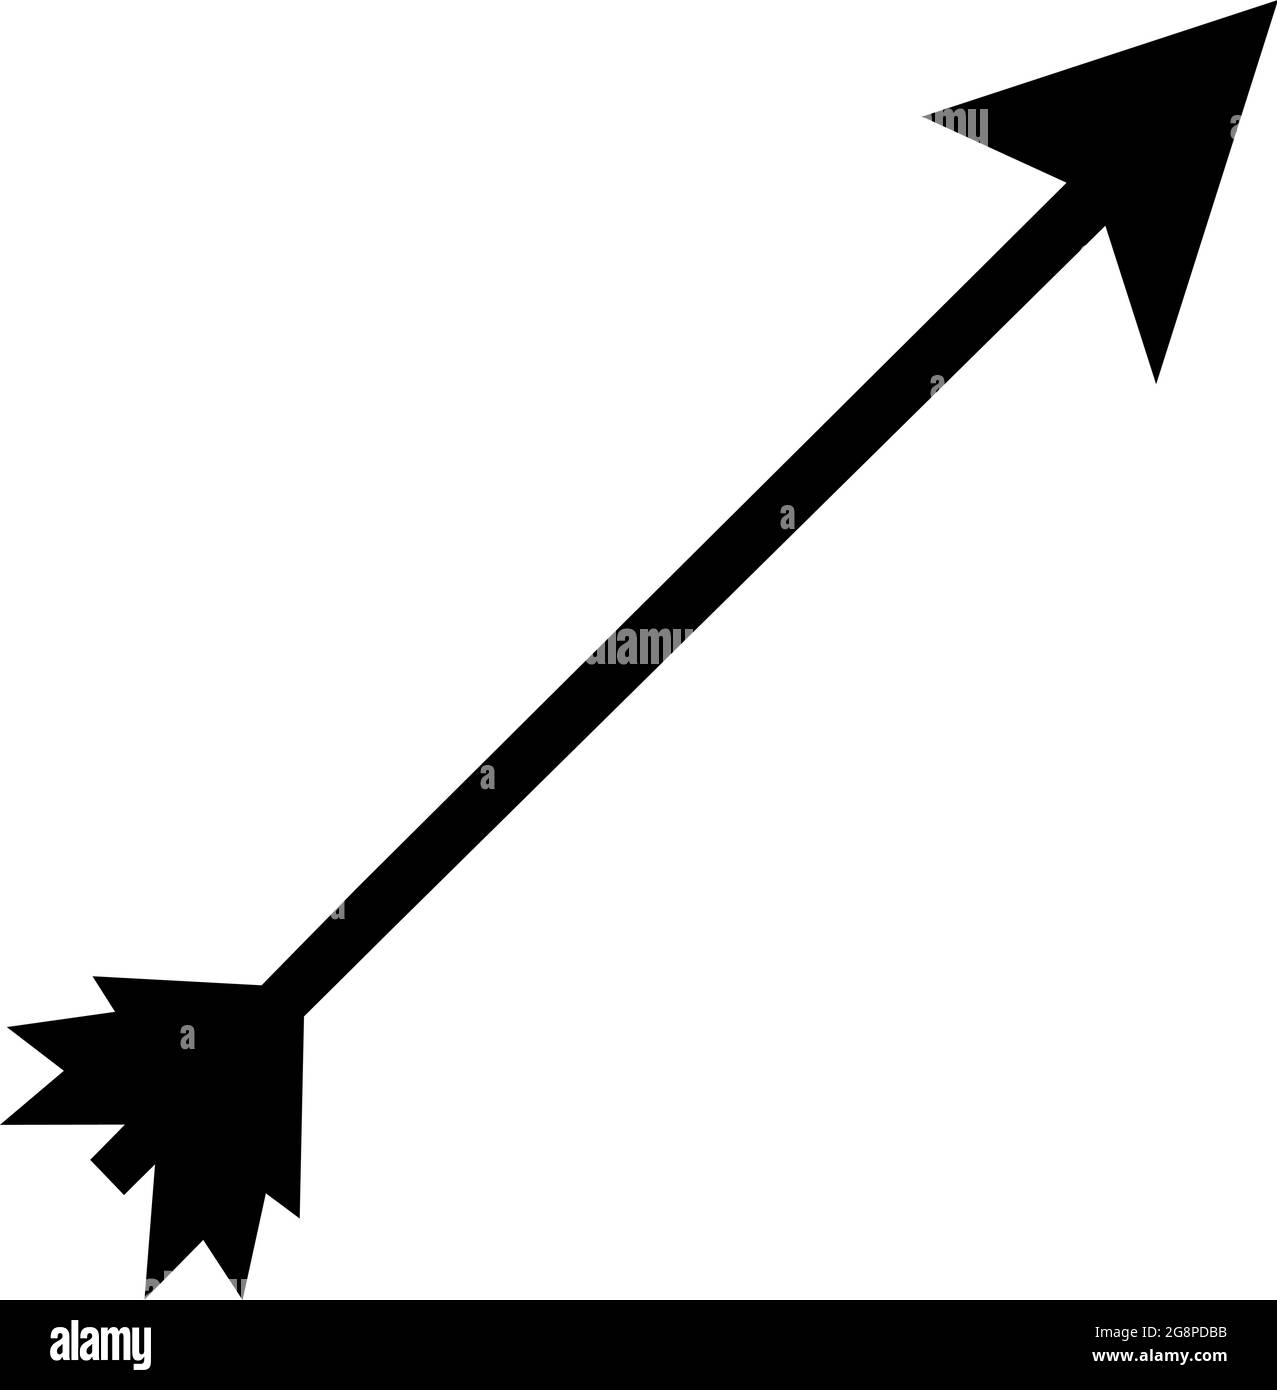 Vector illustration of the black silhouette of an archer arrow Stock Vector